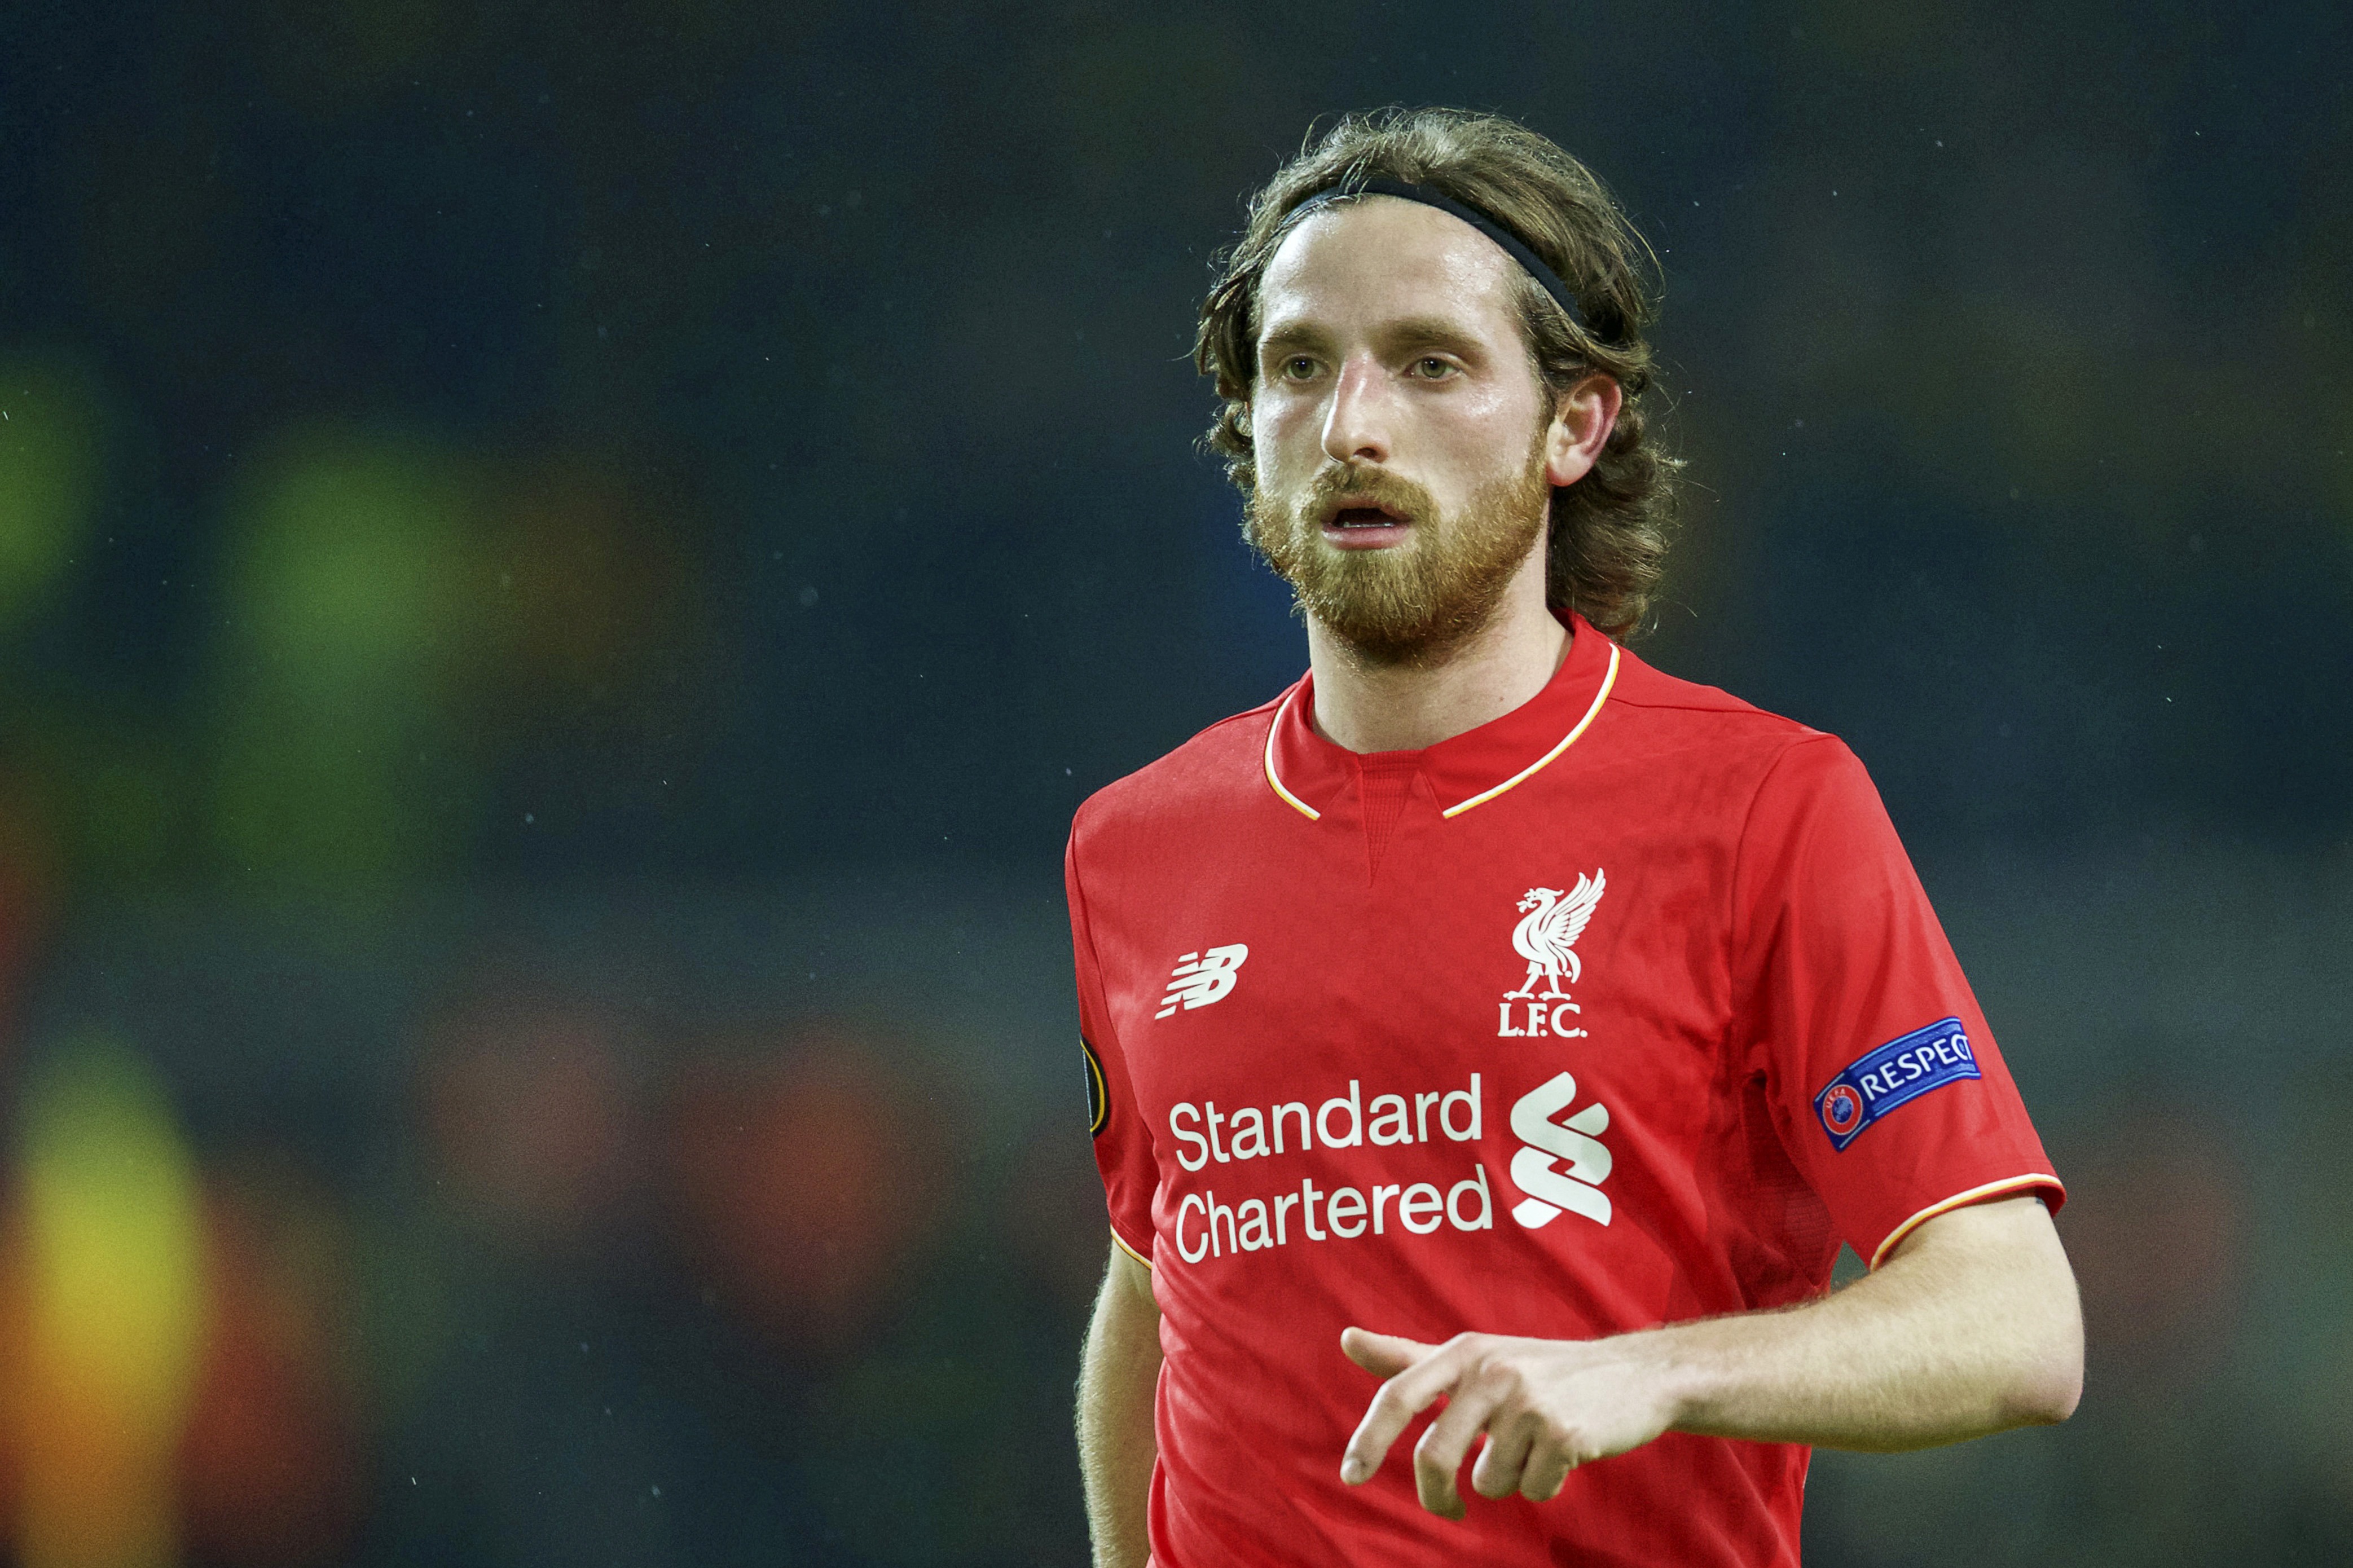 Joe Allen of Liverpool FC during the UEFA Europa League quarter-final match between Borussia Dortmund and Liverpool on April 7, 2016 at the Signal Iduna Park stadium at Dortmund, Germany.(Photo by VI Images via Getty Images)